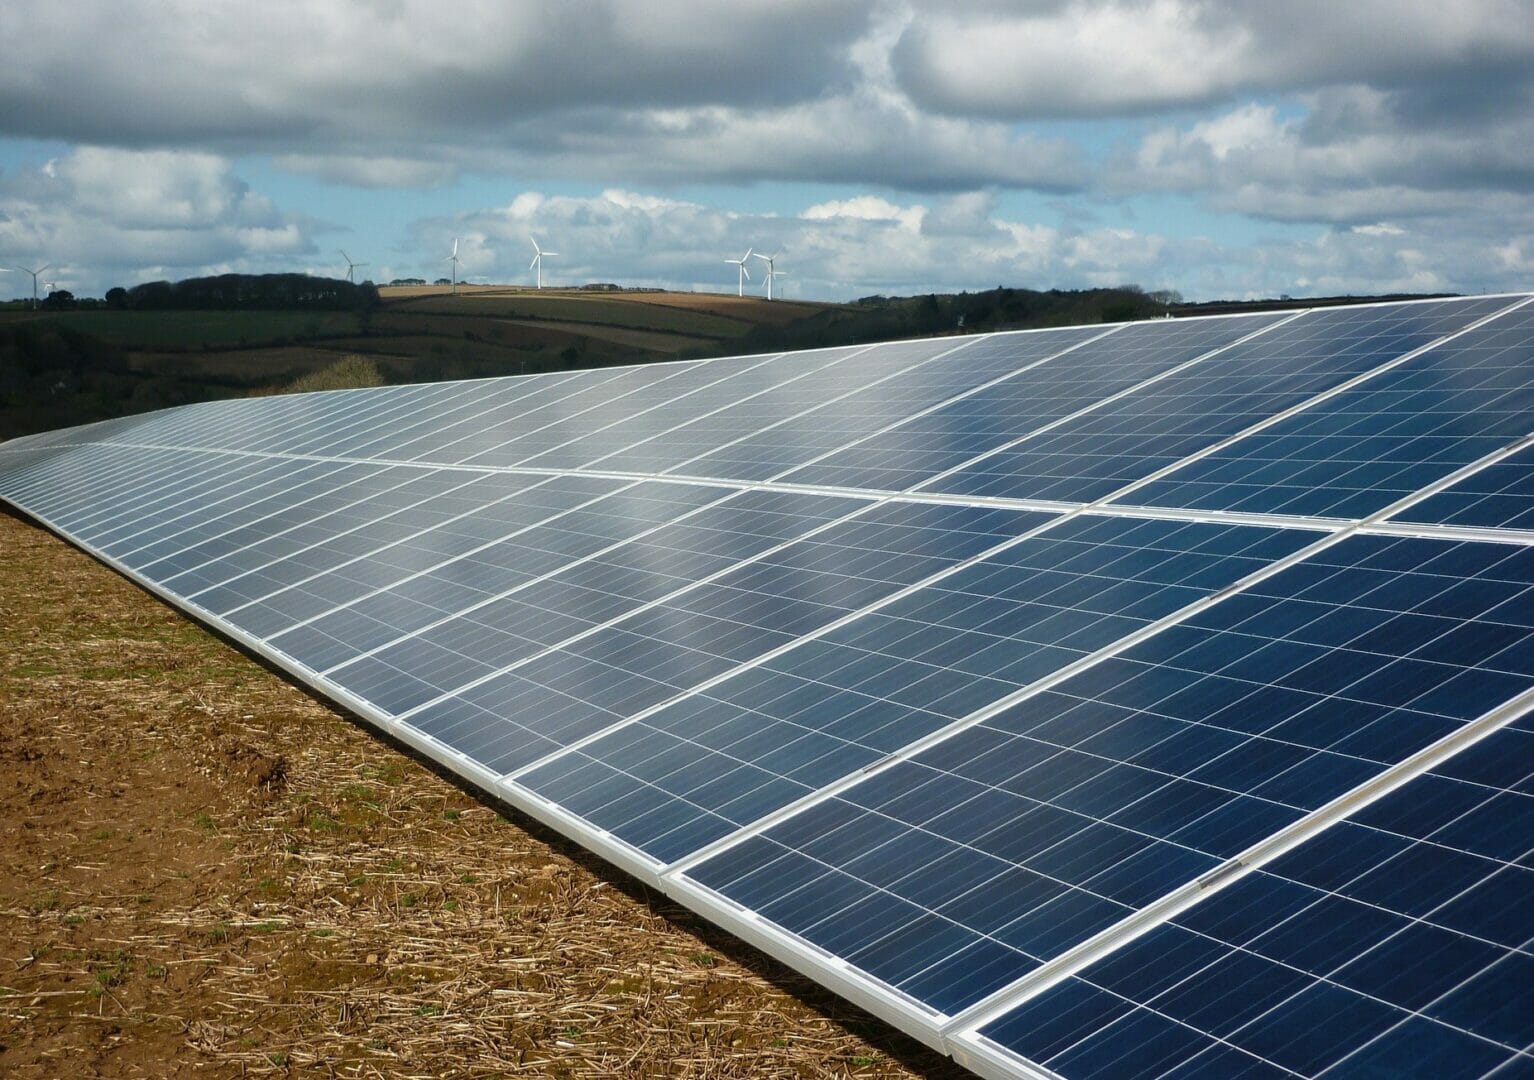 GDG Appointed for Design of Timahoe North Solar Farm Enabling Works